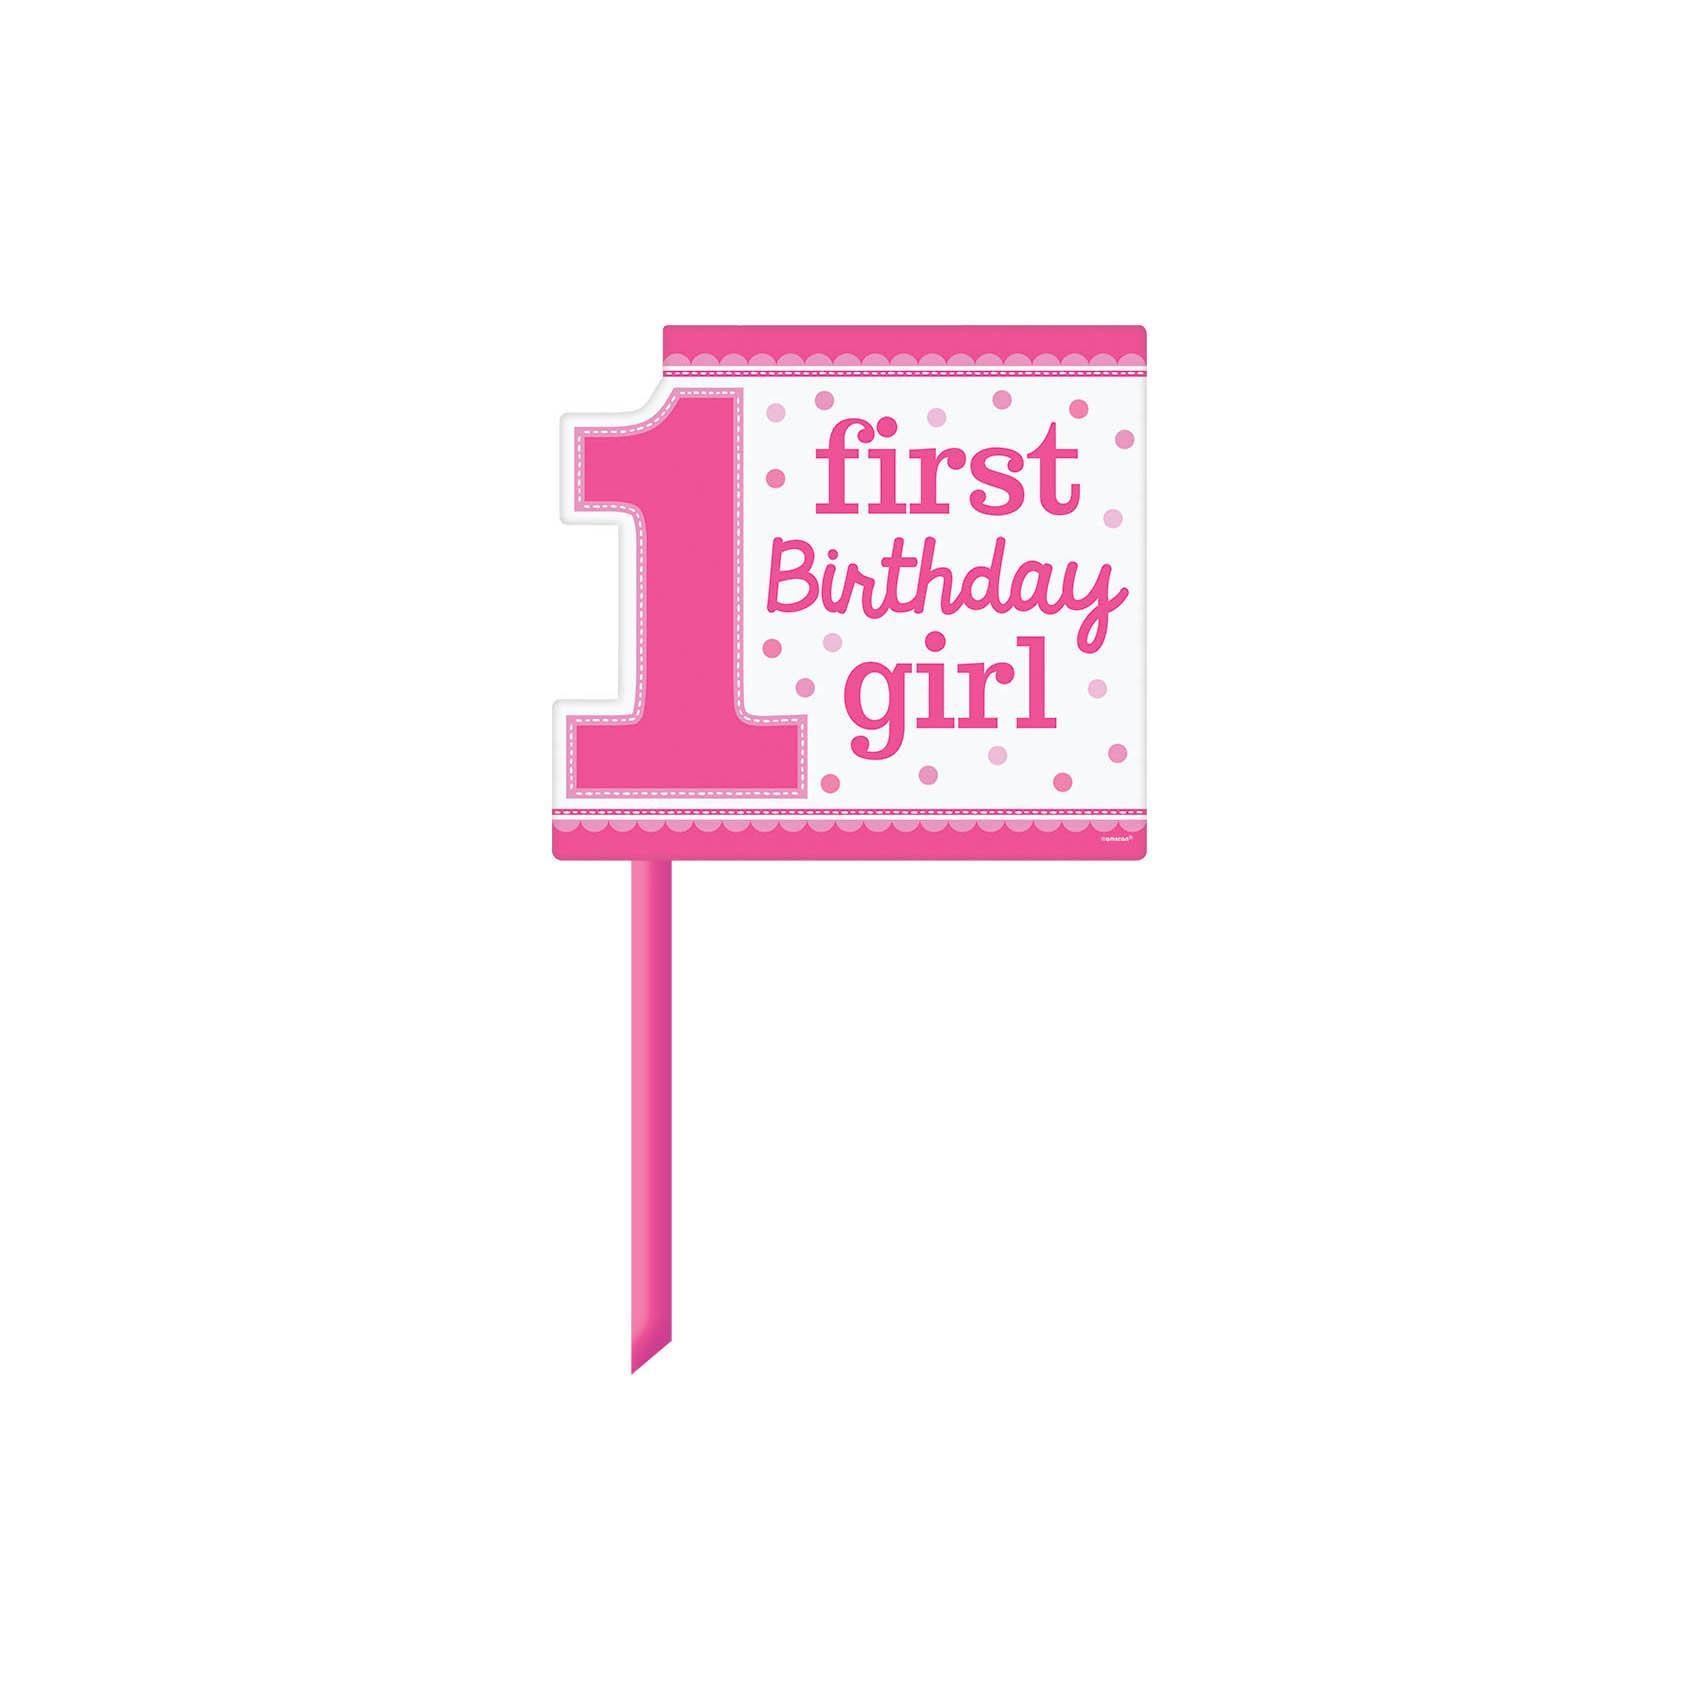 1st Birthday Girl Yard Sign Decorations - Party Centre - Party Centre